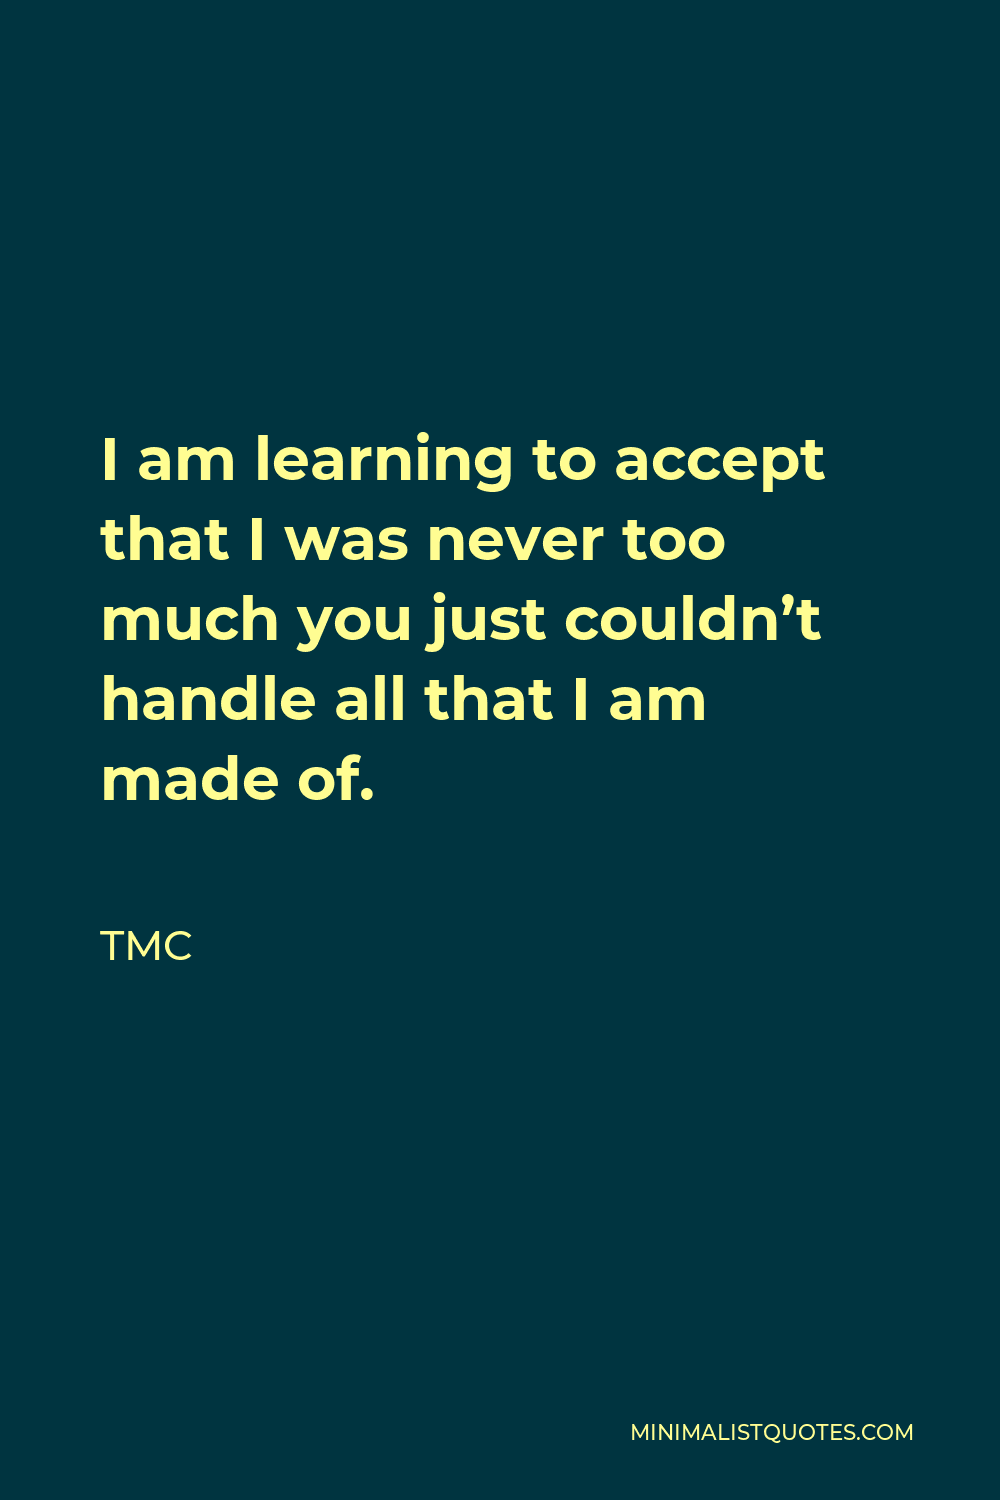 TMC Quote - I am learning to accept that I was never too much you just couldn’t handle all that I am made of.